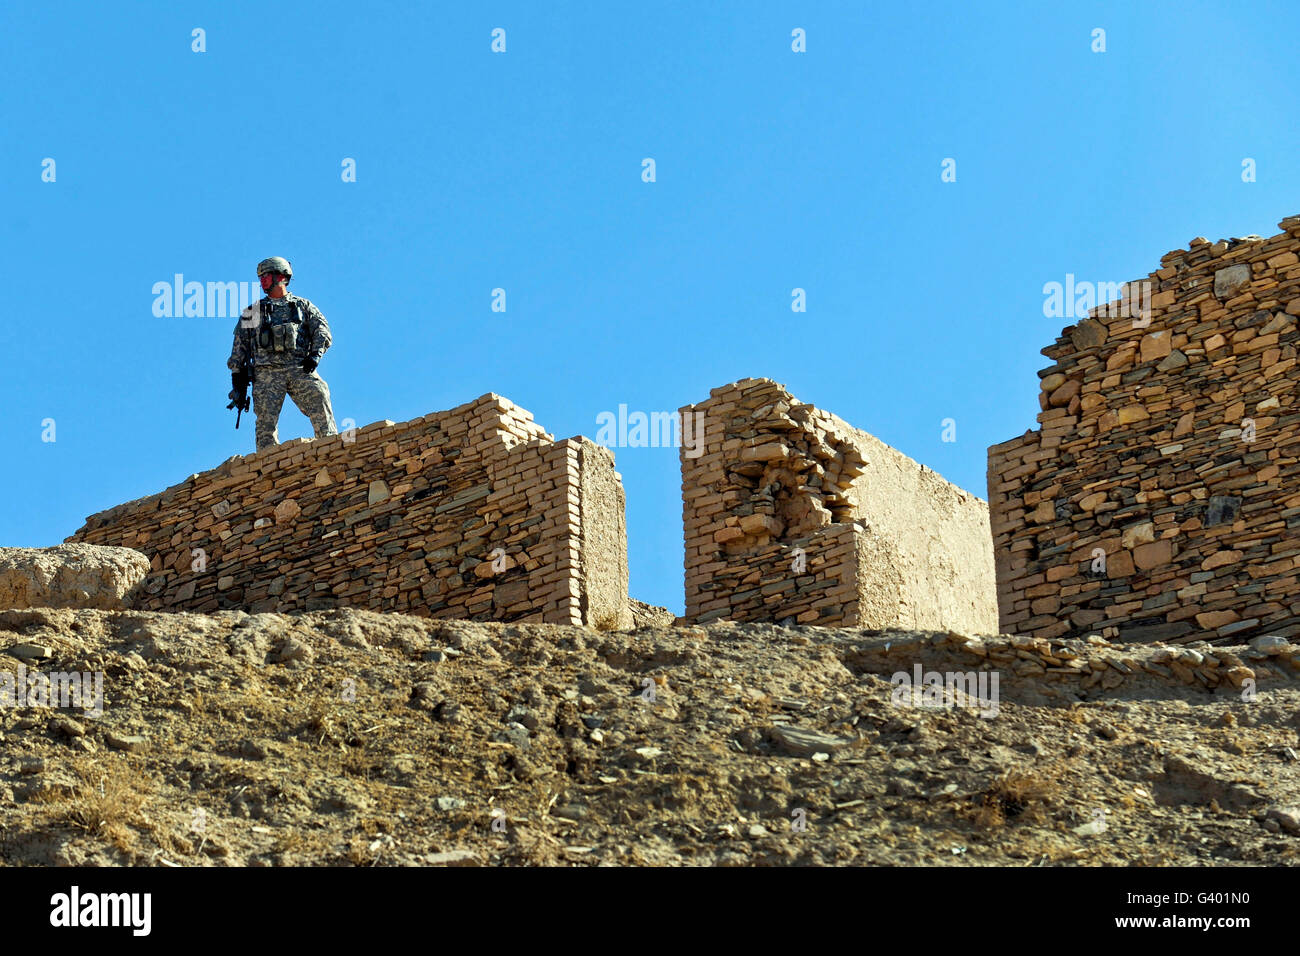 U.S. Army soldier stands guard in Afghanistan. Stock Photo